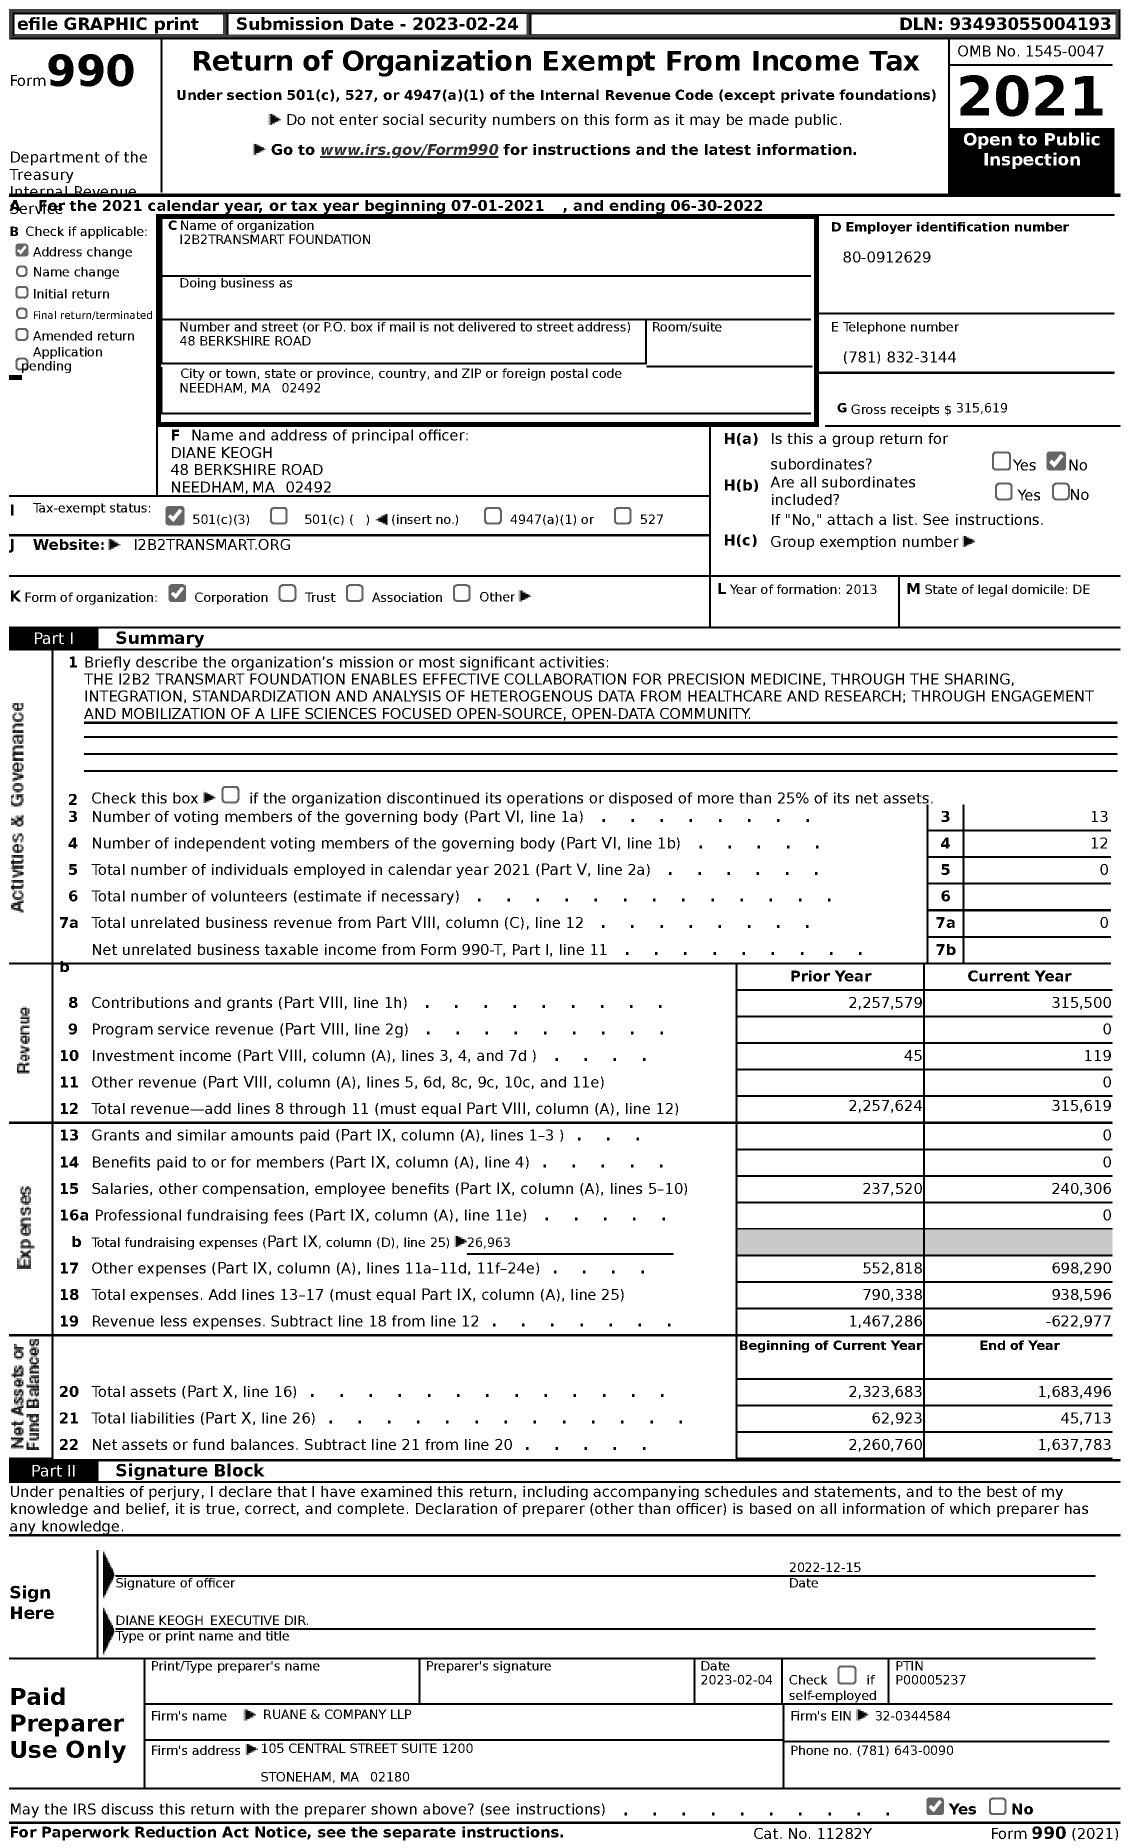 Image of first page of 2021 Form 990 for I2b2transmart Foundation